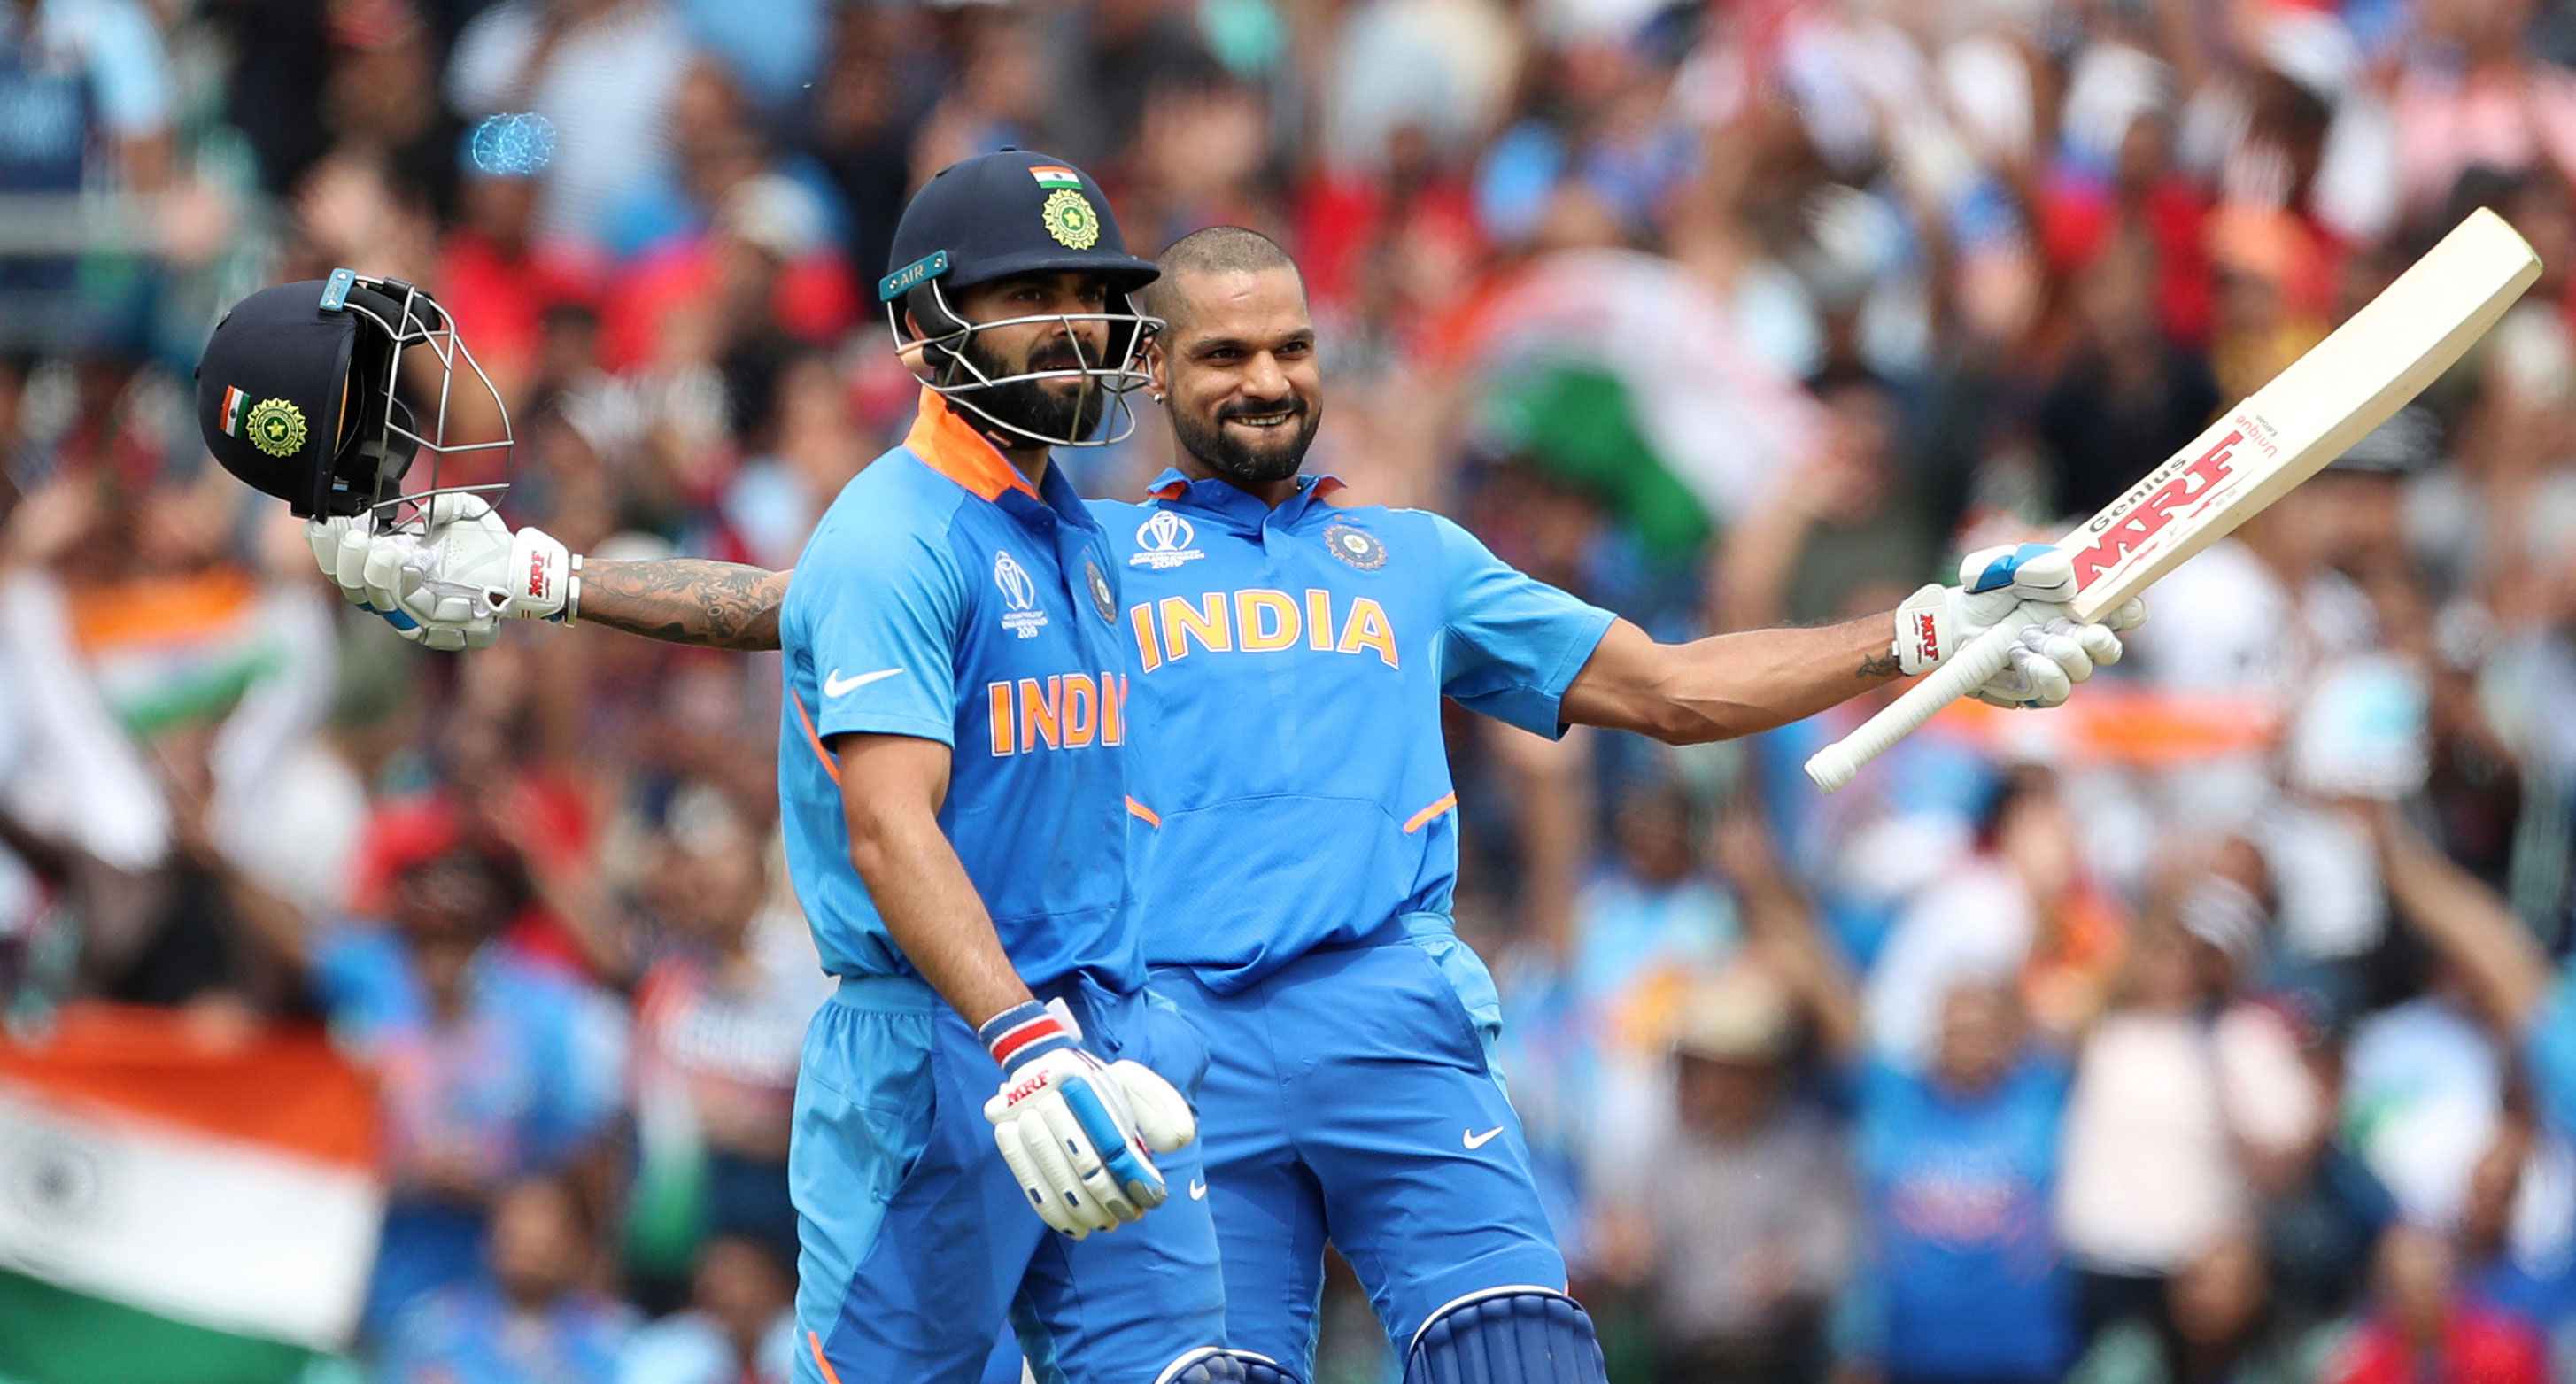 Virat Kohli and Shikhar Dhawan after the latter scored a century during the ICC Cricket World Cup match between Australia and India at The Oval in London, on June 9, 2019.  